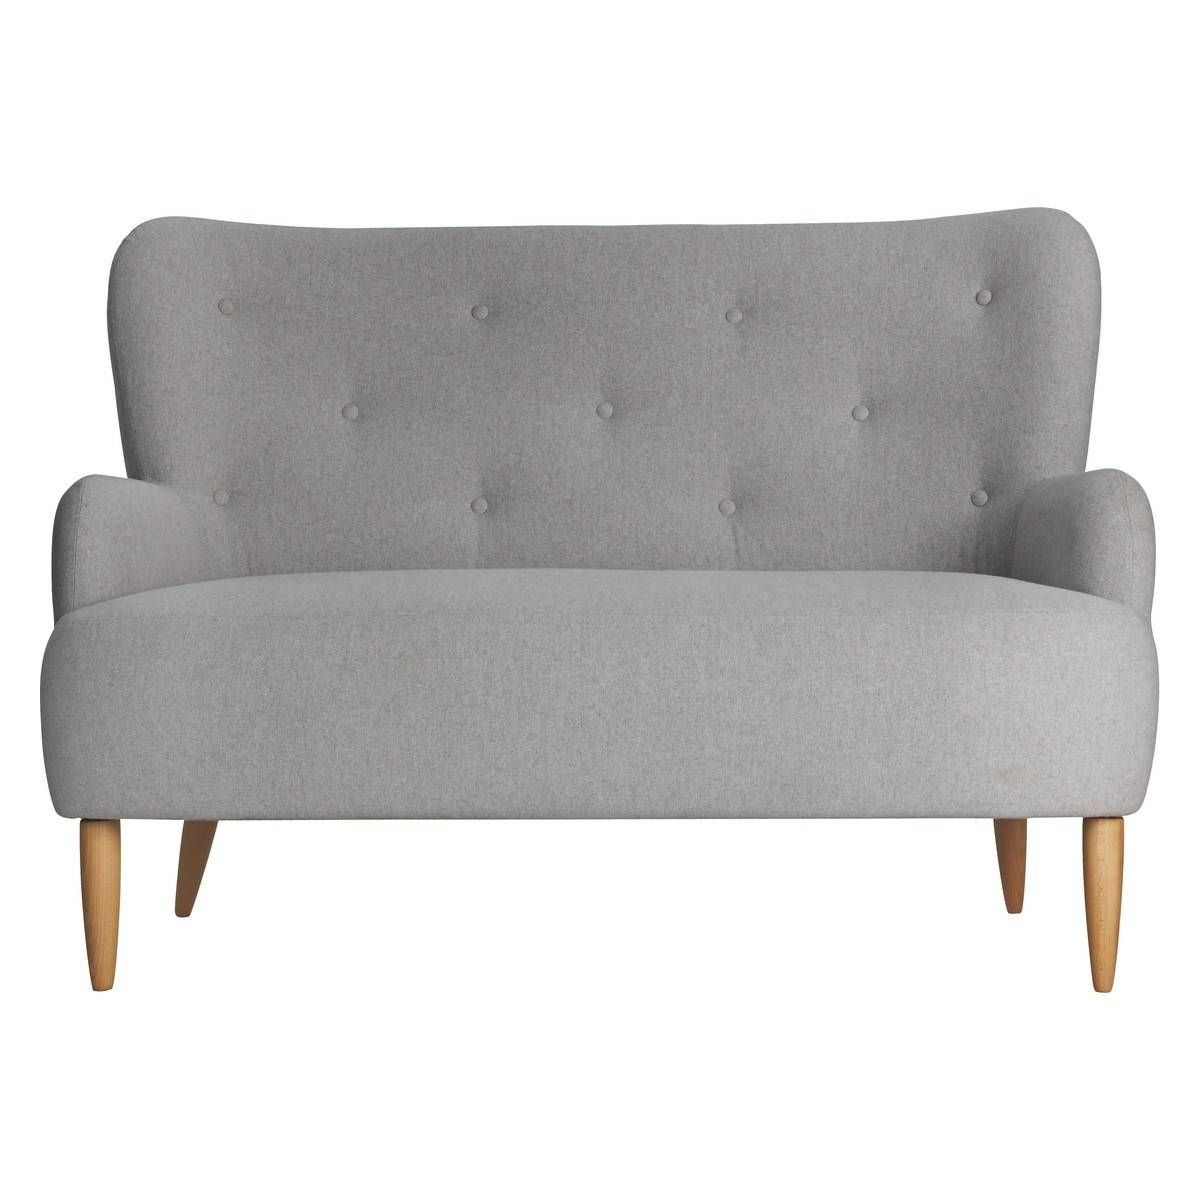 Wilmot Grey Wool Mix 2 Seater Sofa | Buy Now At Habitat Uk Throughout Two Seater Chairs (View 8 of 30)